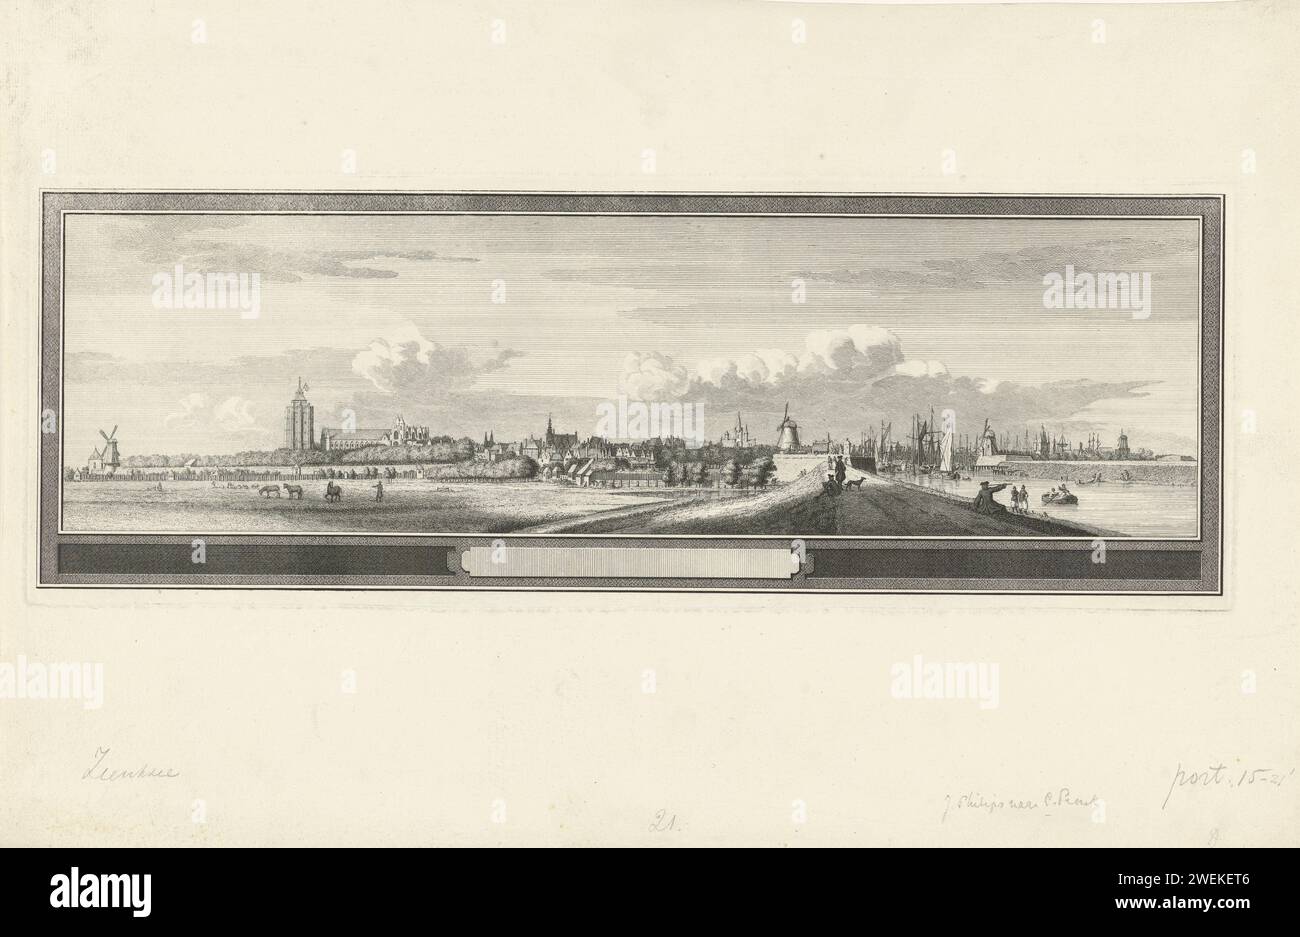 View of Zierikzee, 1743, Jan Caspar Philips, After Cornelis Pronk, 1743 - 1751 print View of Zierikzee, seen from Westhavenendijk, with the Sint Lievensmonsterkerk on the left. In the situation around 1743. With an empty margin.  paper etching / engraving prospect of city, town panorama, silhouette of city. church (exterior) Zierikzee. Sint-Lievensmonsterkerk Stock Photo